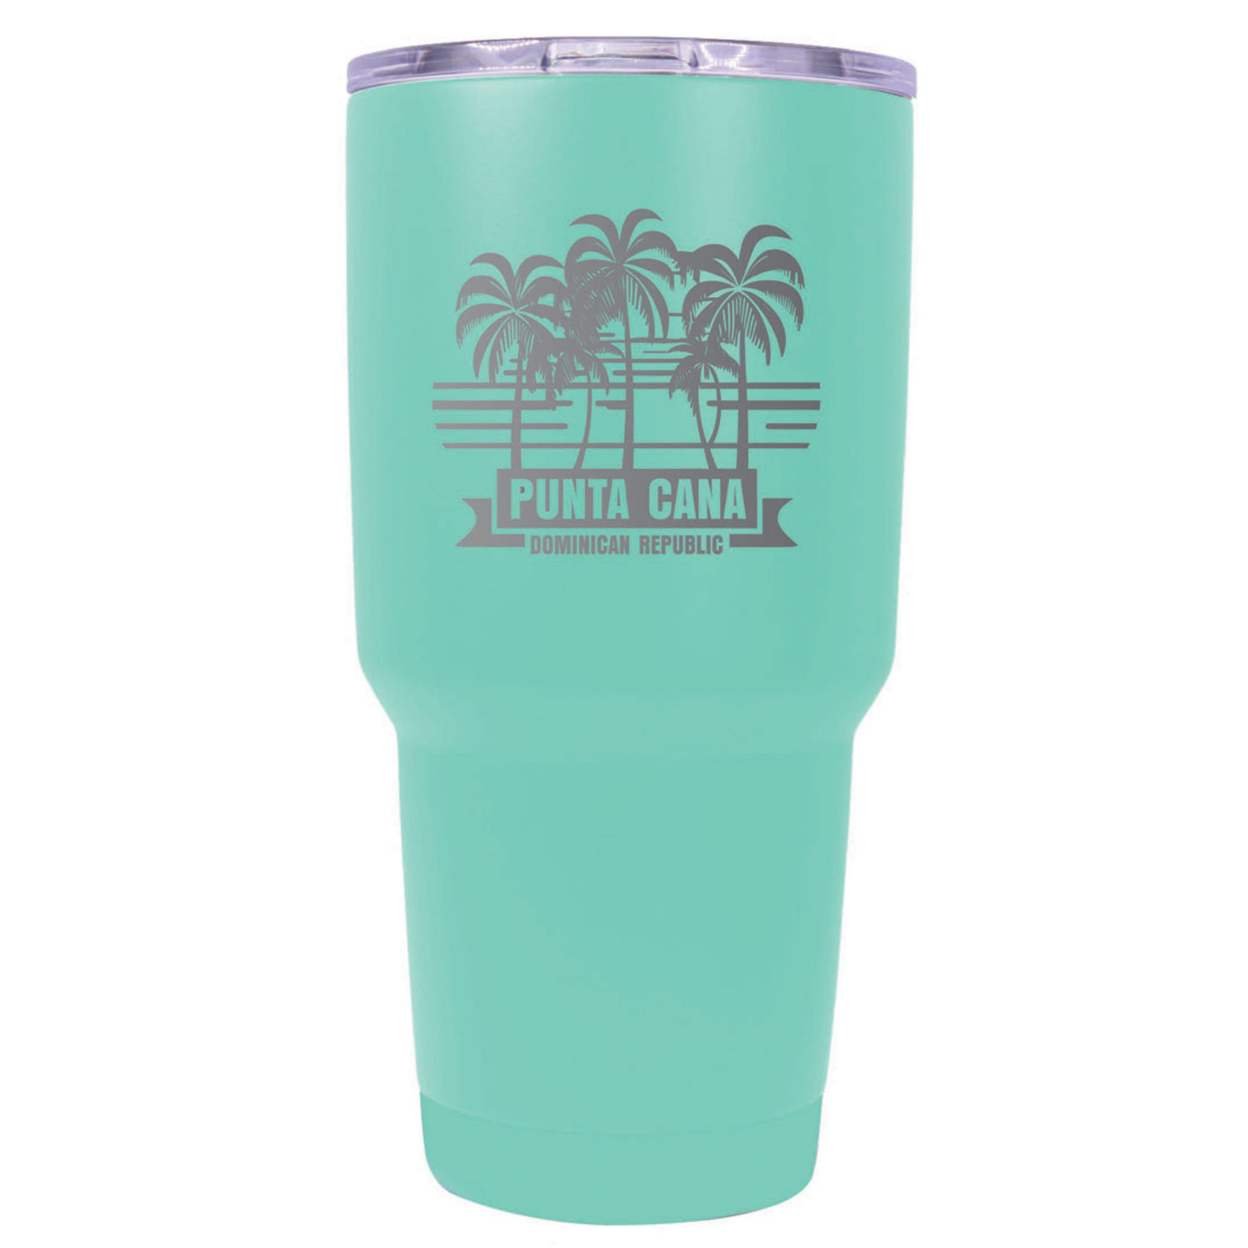 Punta Cana Dominican Republic Souvenir 24 Oz Insulated Stainless Steel Tumbler Etched - Green, PALMS